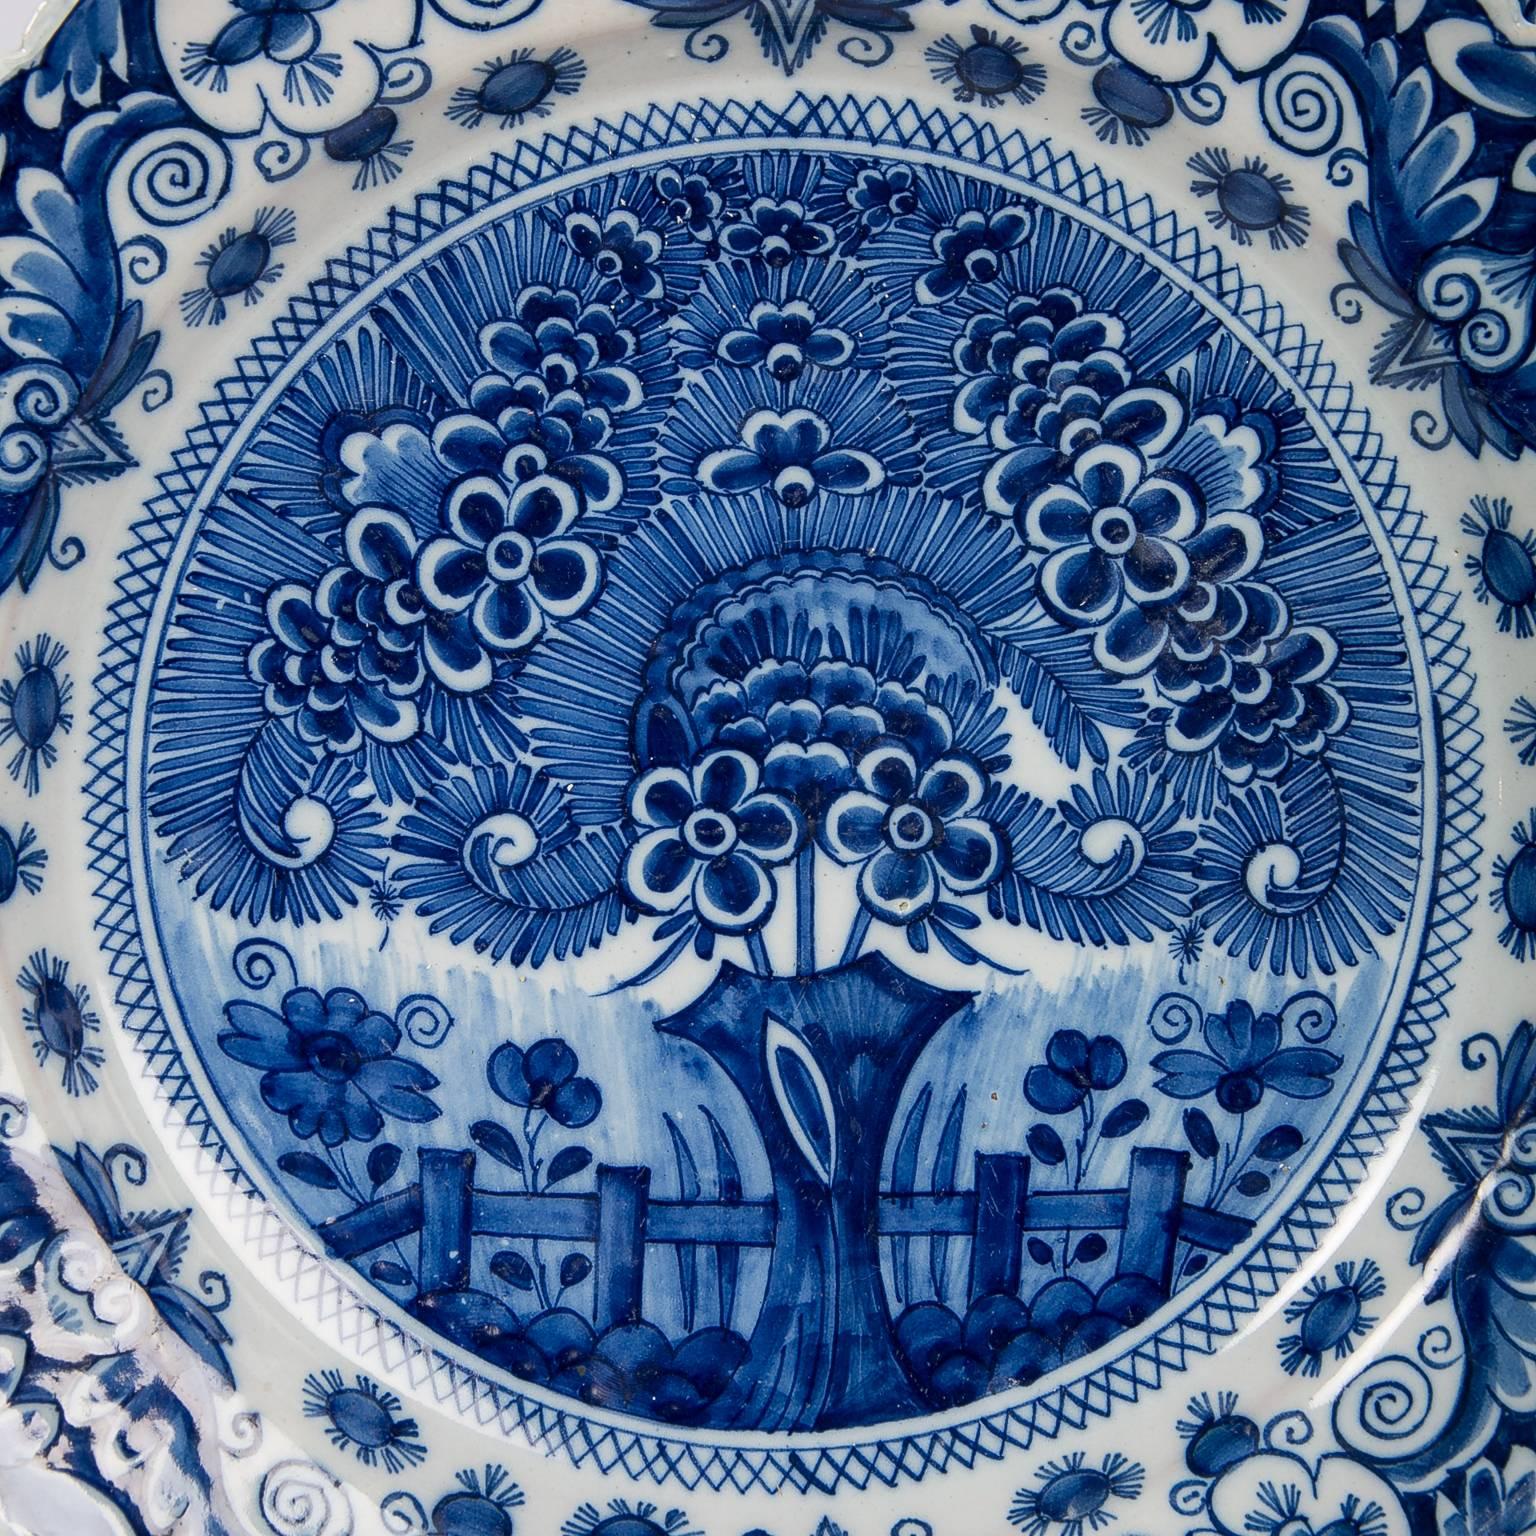 Blue and White Delft Chargers Theeboom Pattern made by 